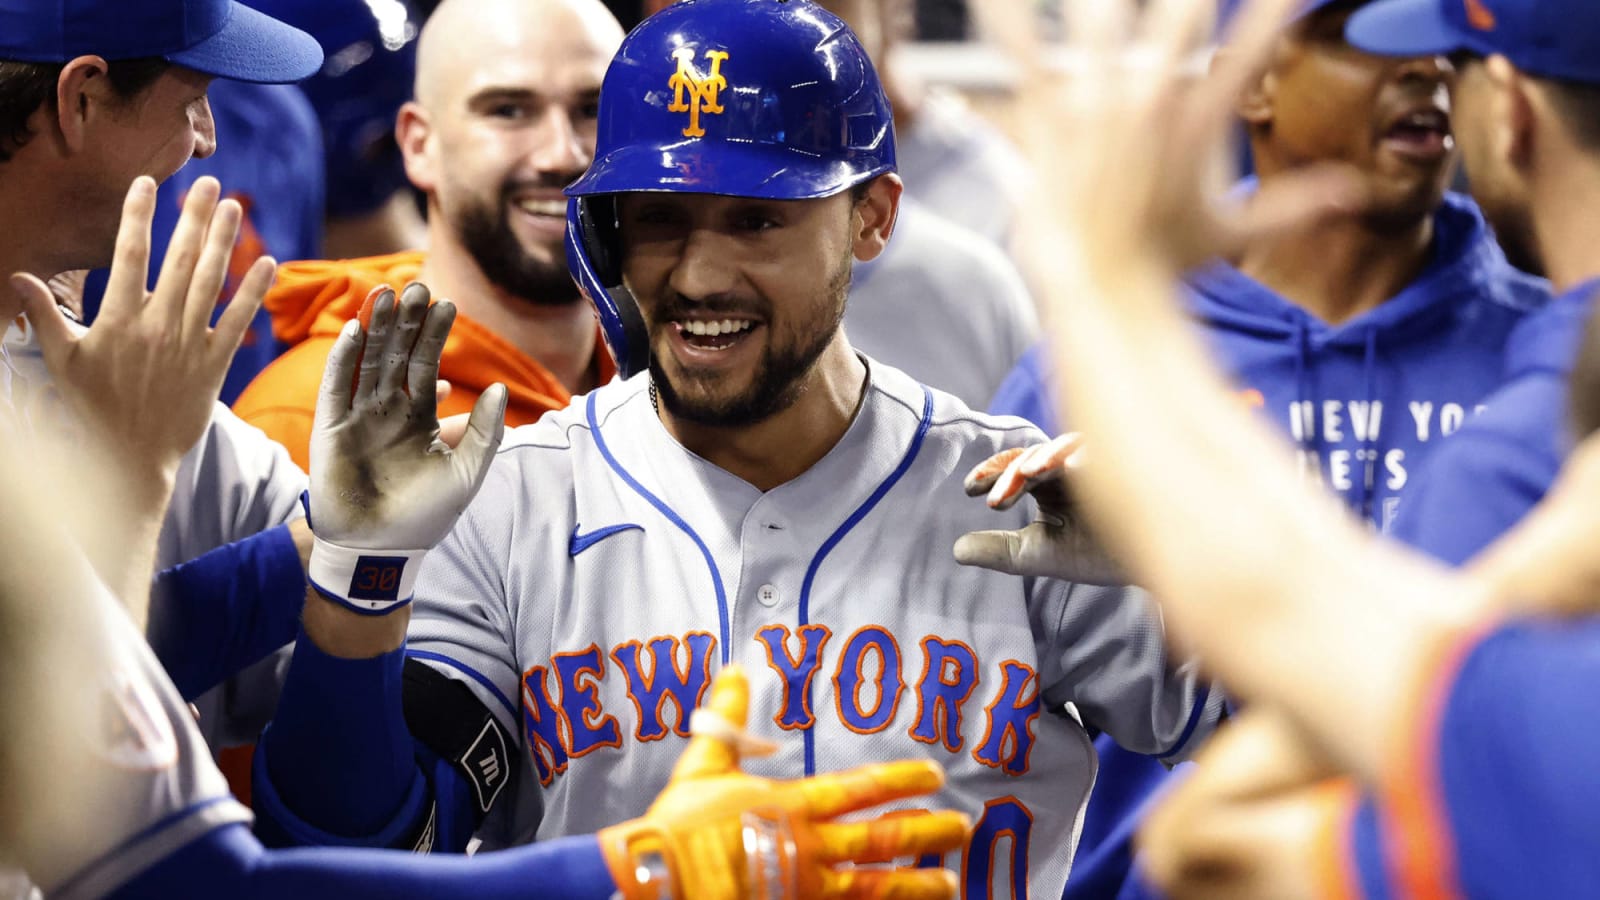 Coming off miserable 2021, Michael Conforto could be a perfect match for Blue Jays